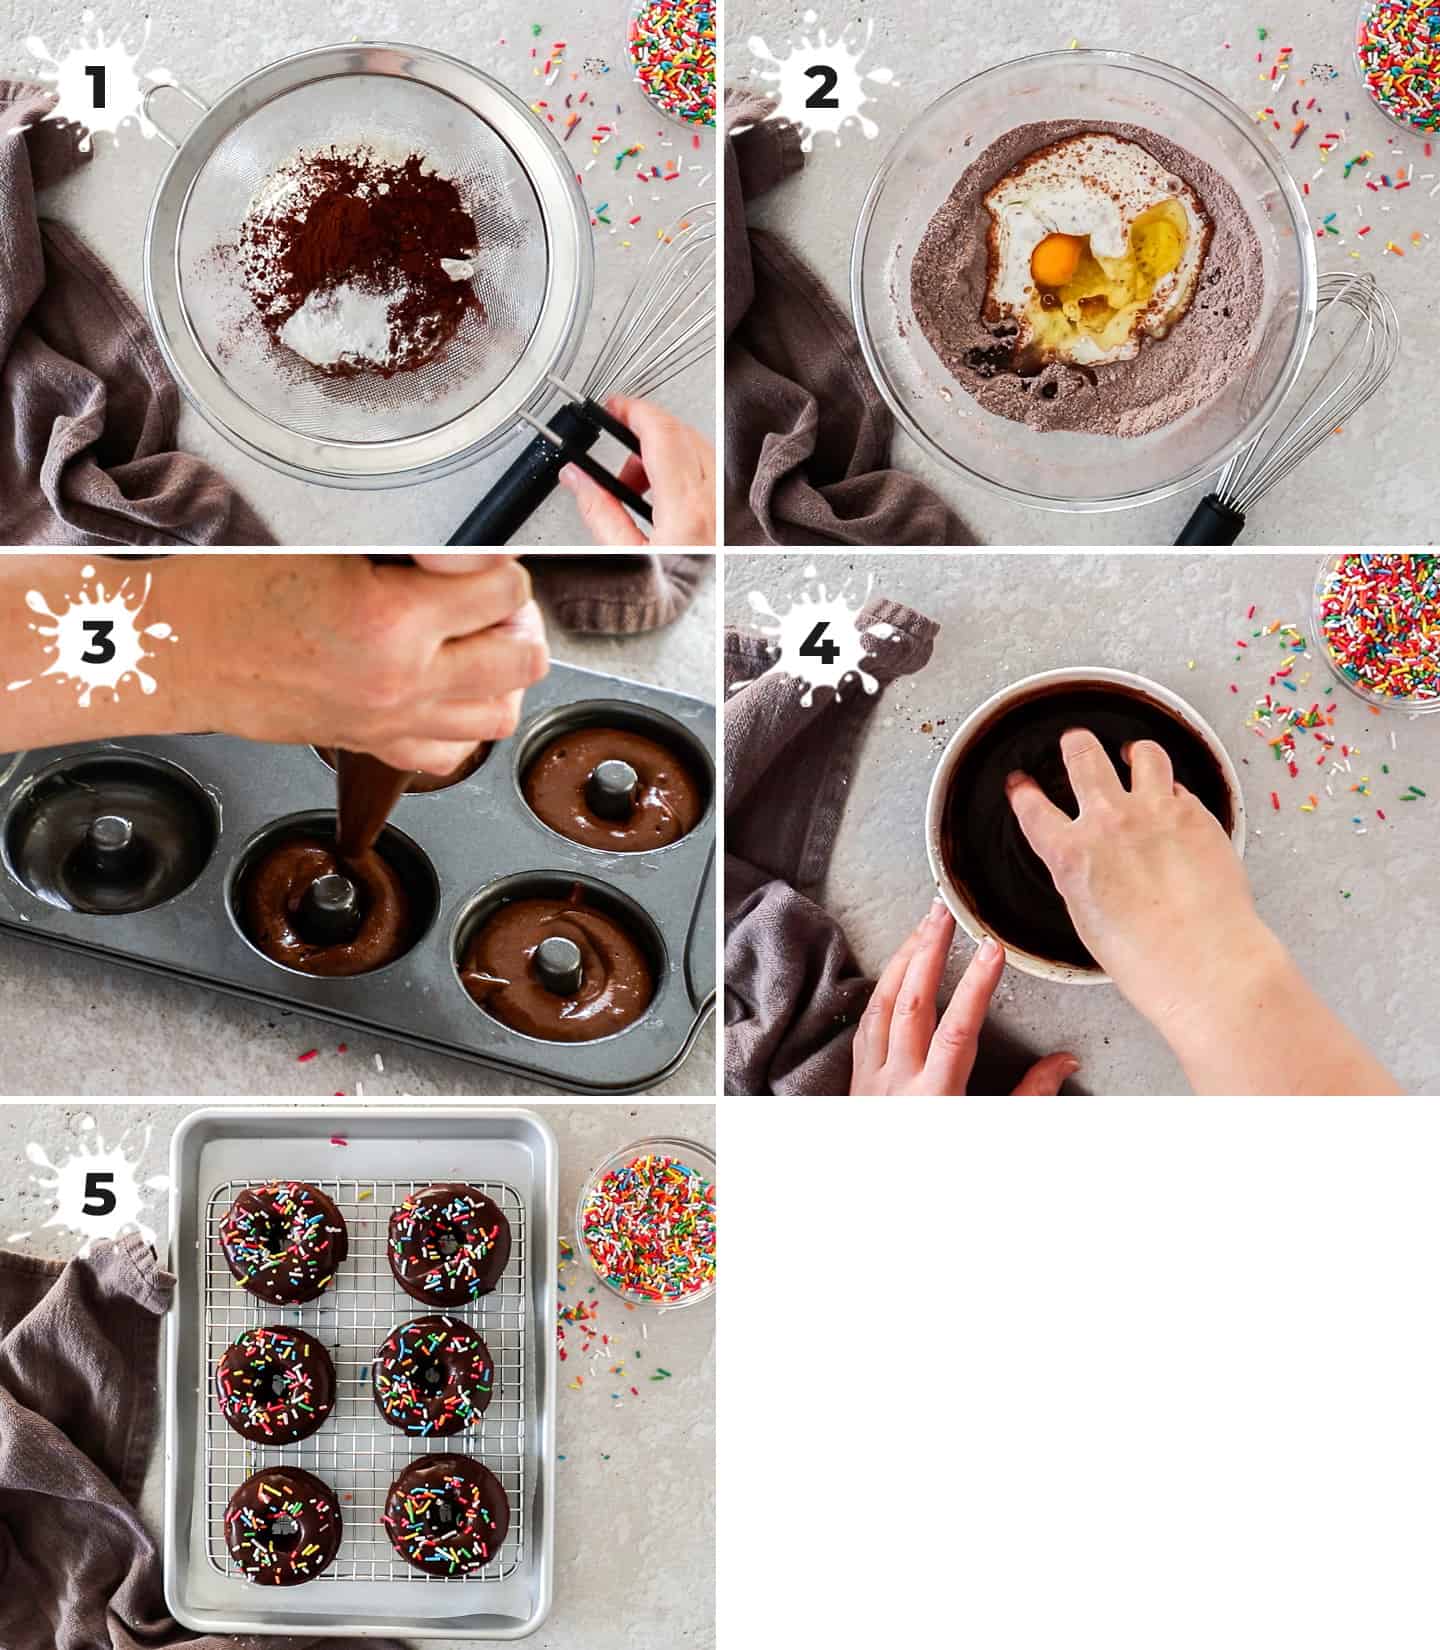 A collage of 5 images showing how to make chocolate sprinkle donuts.